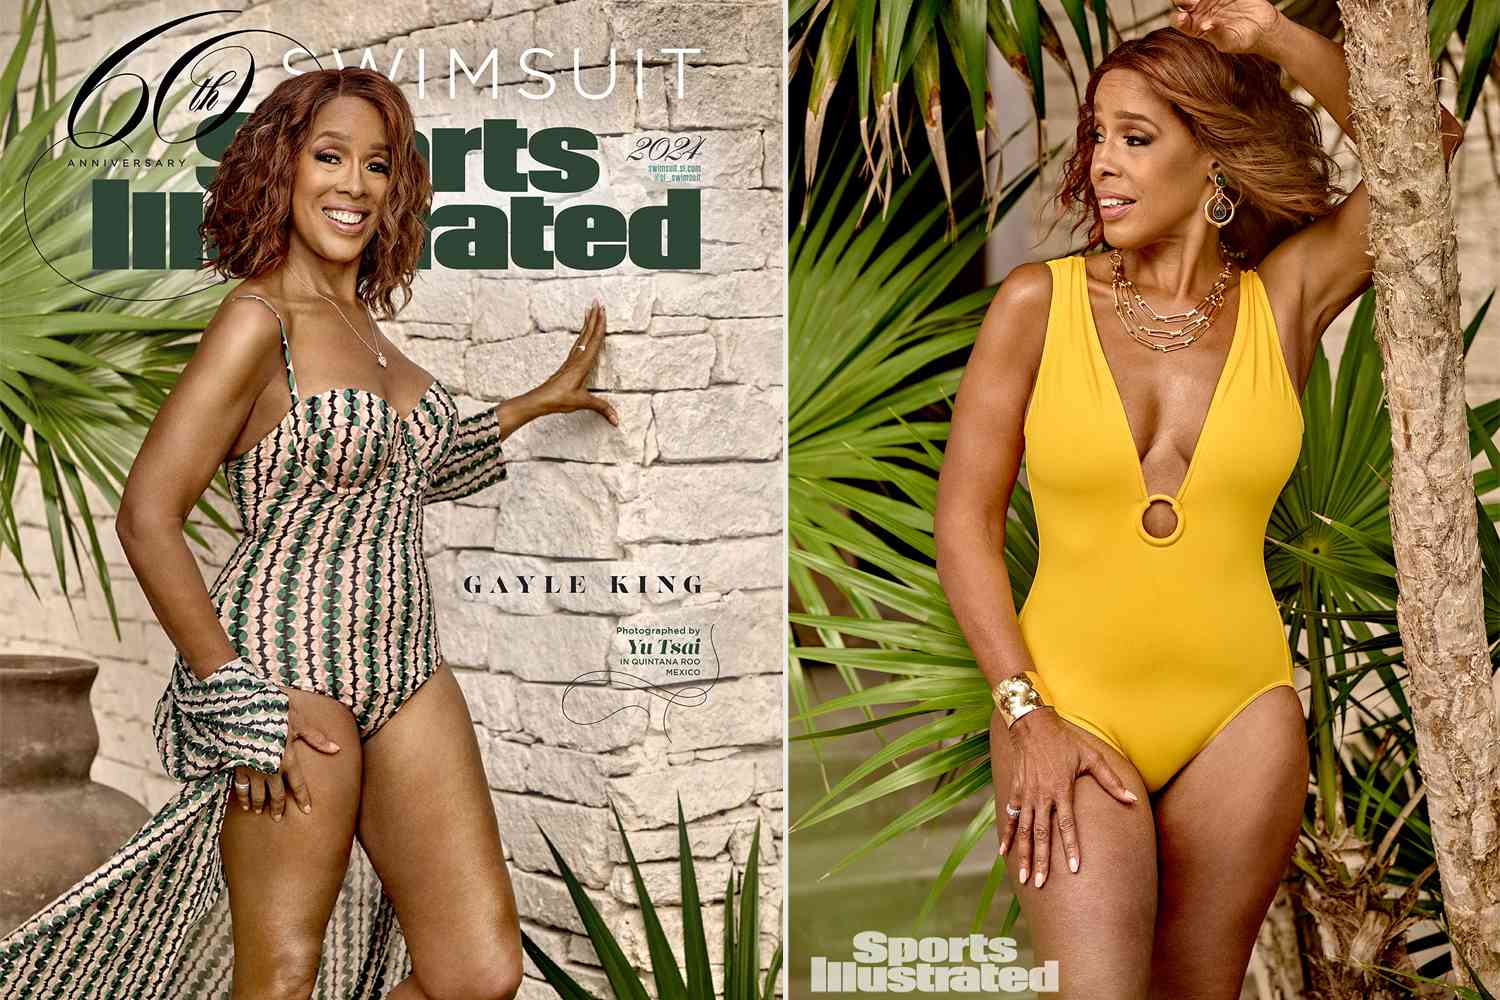 Gayle King, 69, Brings 'Tasteful Cleavage' to “SI Swimsuit” Cover: 'I Thought I Was Being Punked' (Exclusive)